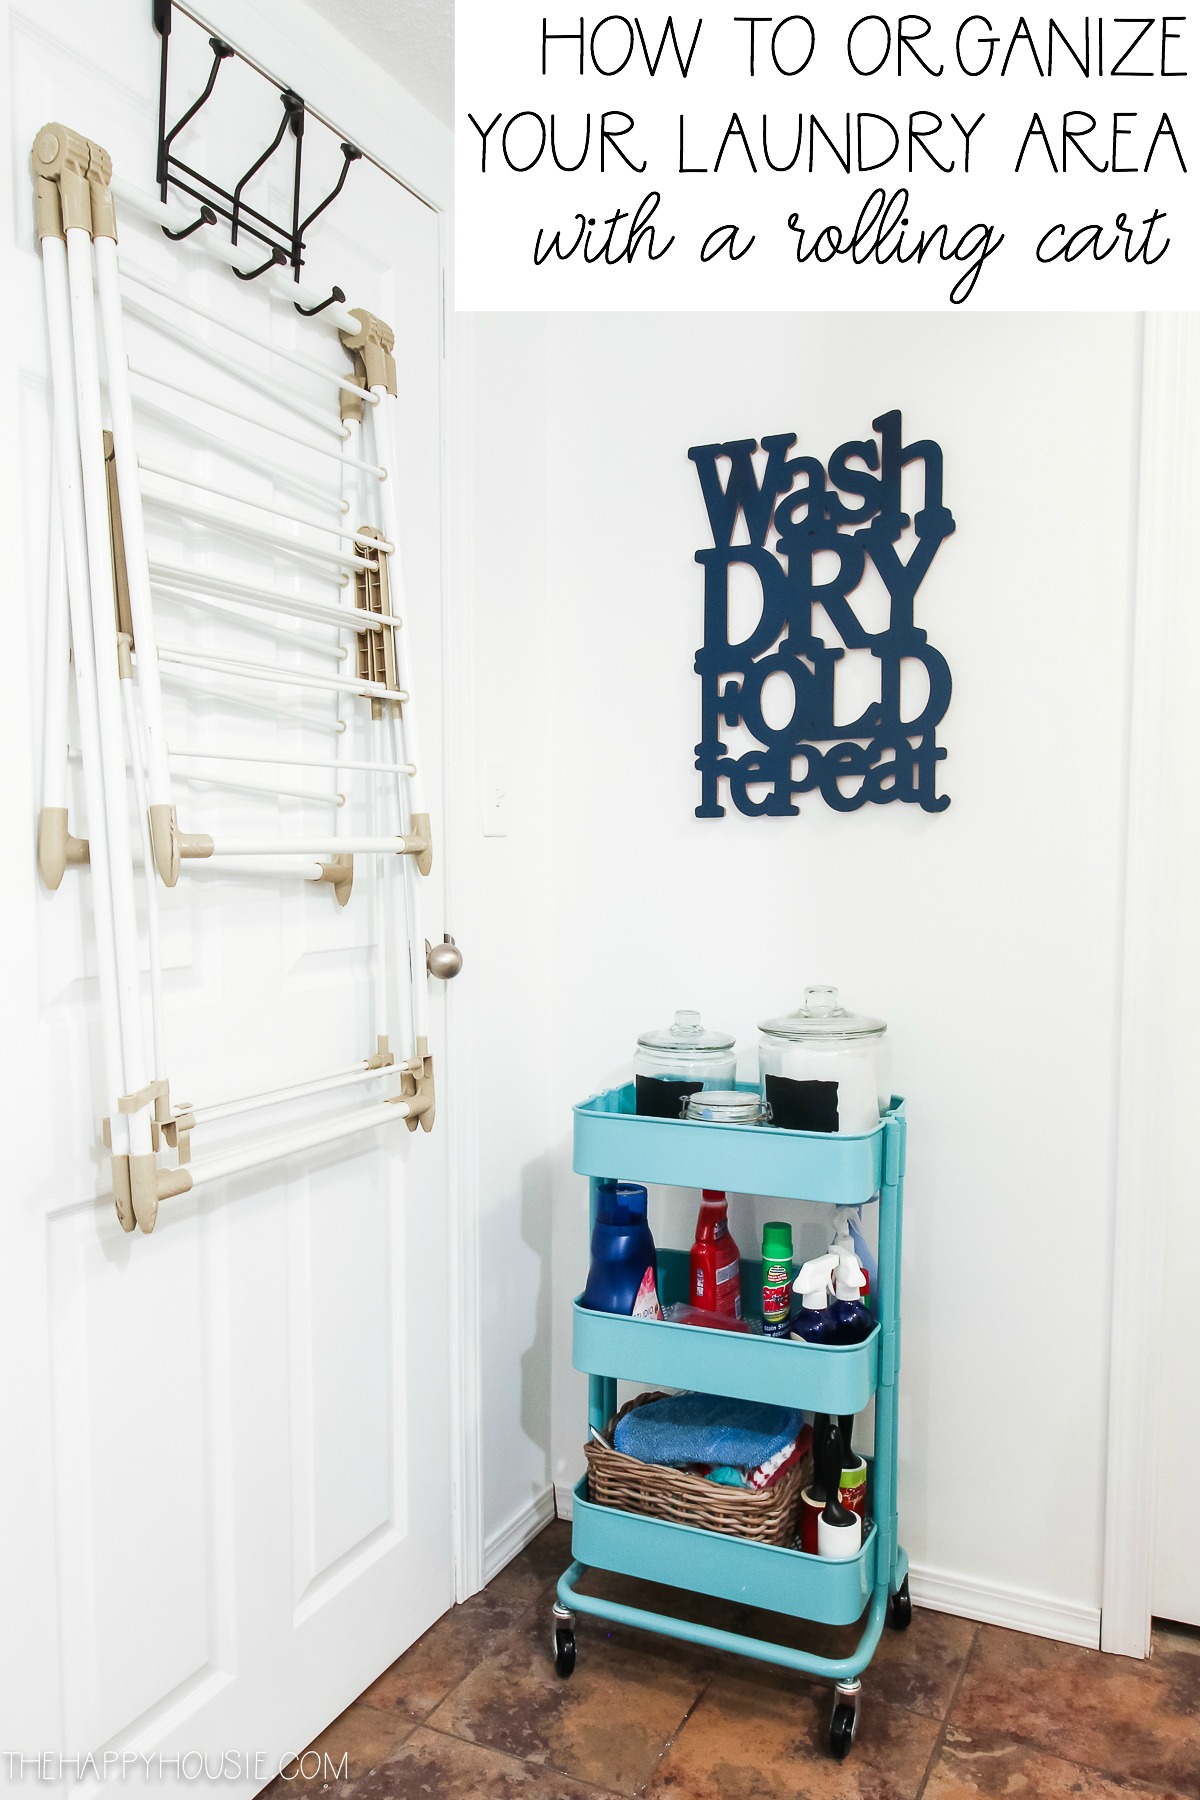 How To Organize Your Laundry Area With A Rolling Cart poster.